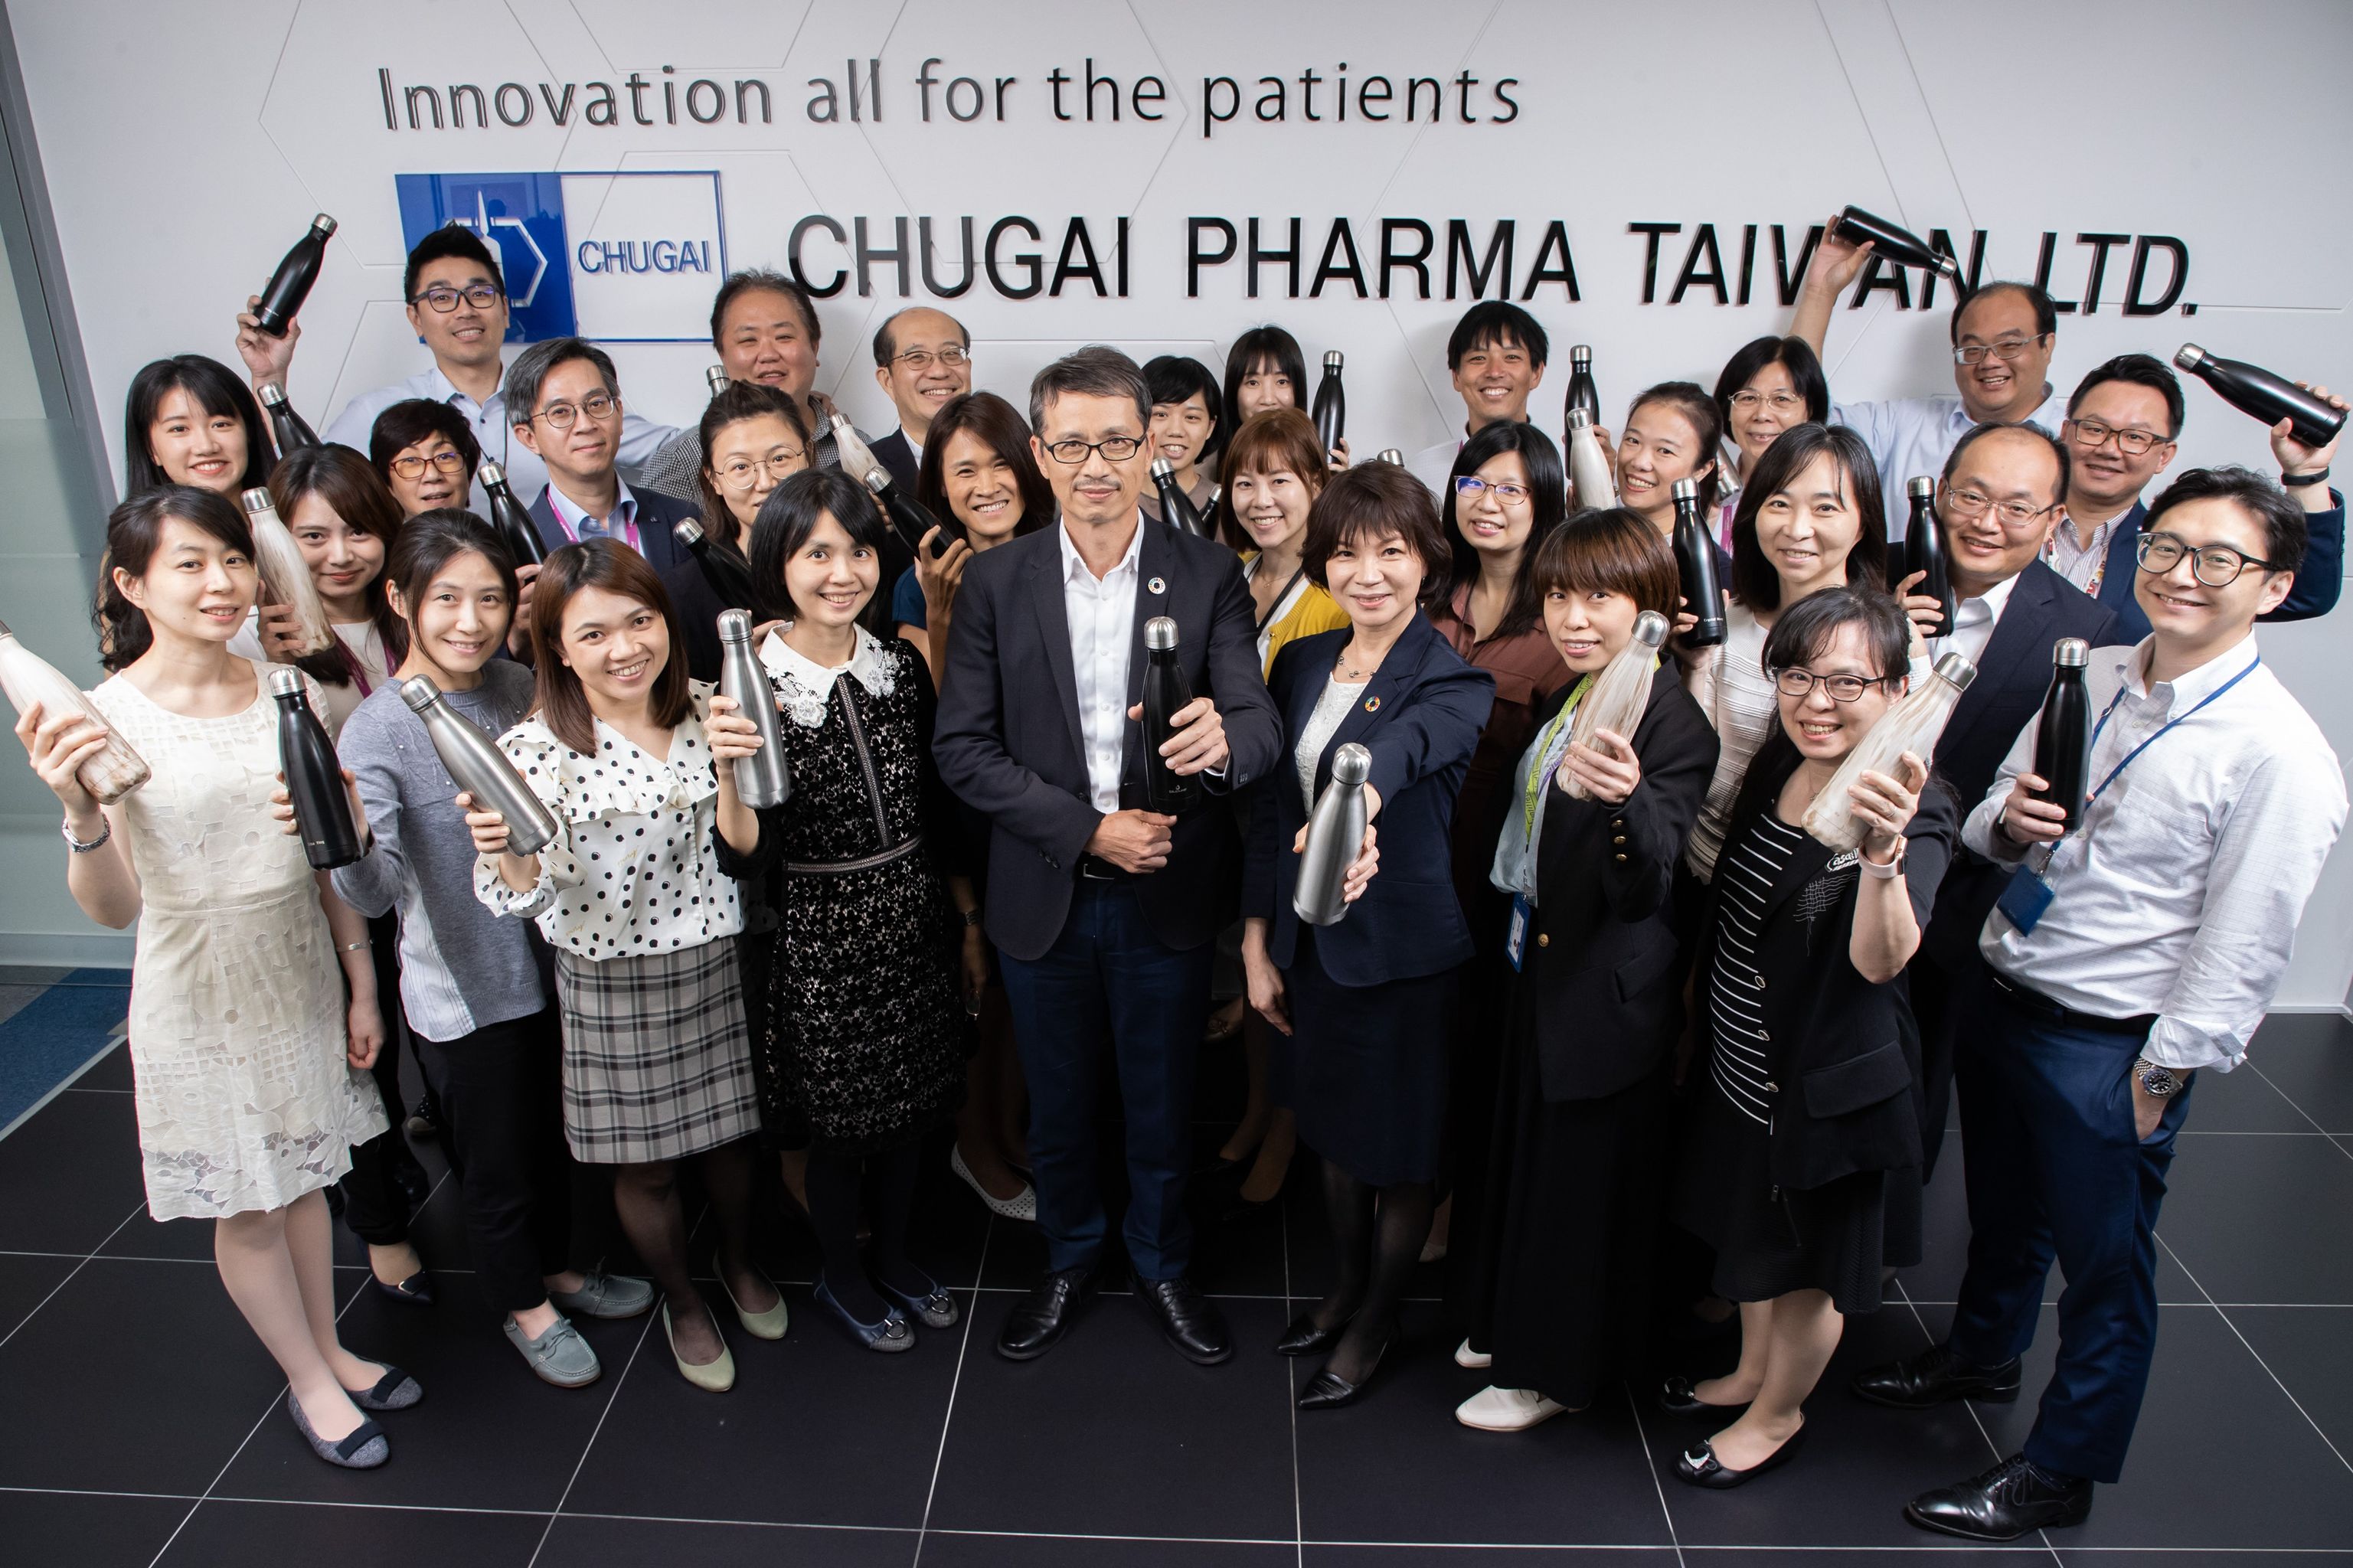 A glass of sparkling water: Chugai Pharma Taiwan takes the lead in plastic reduction and influencing other companies